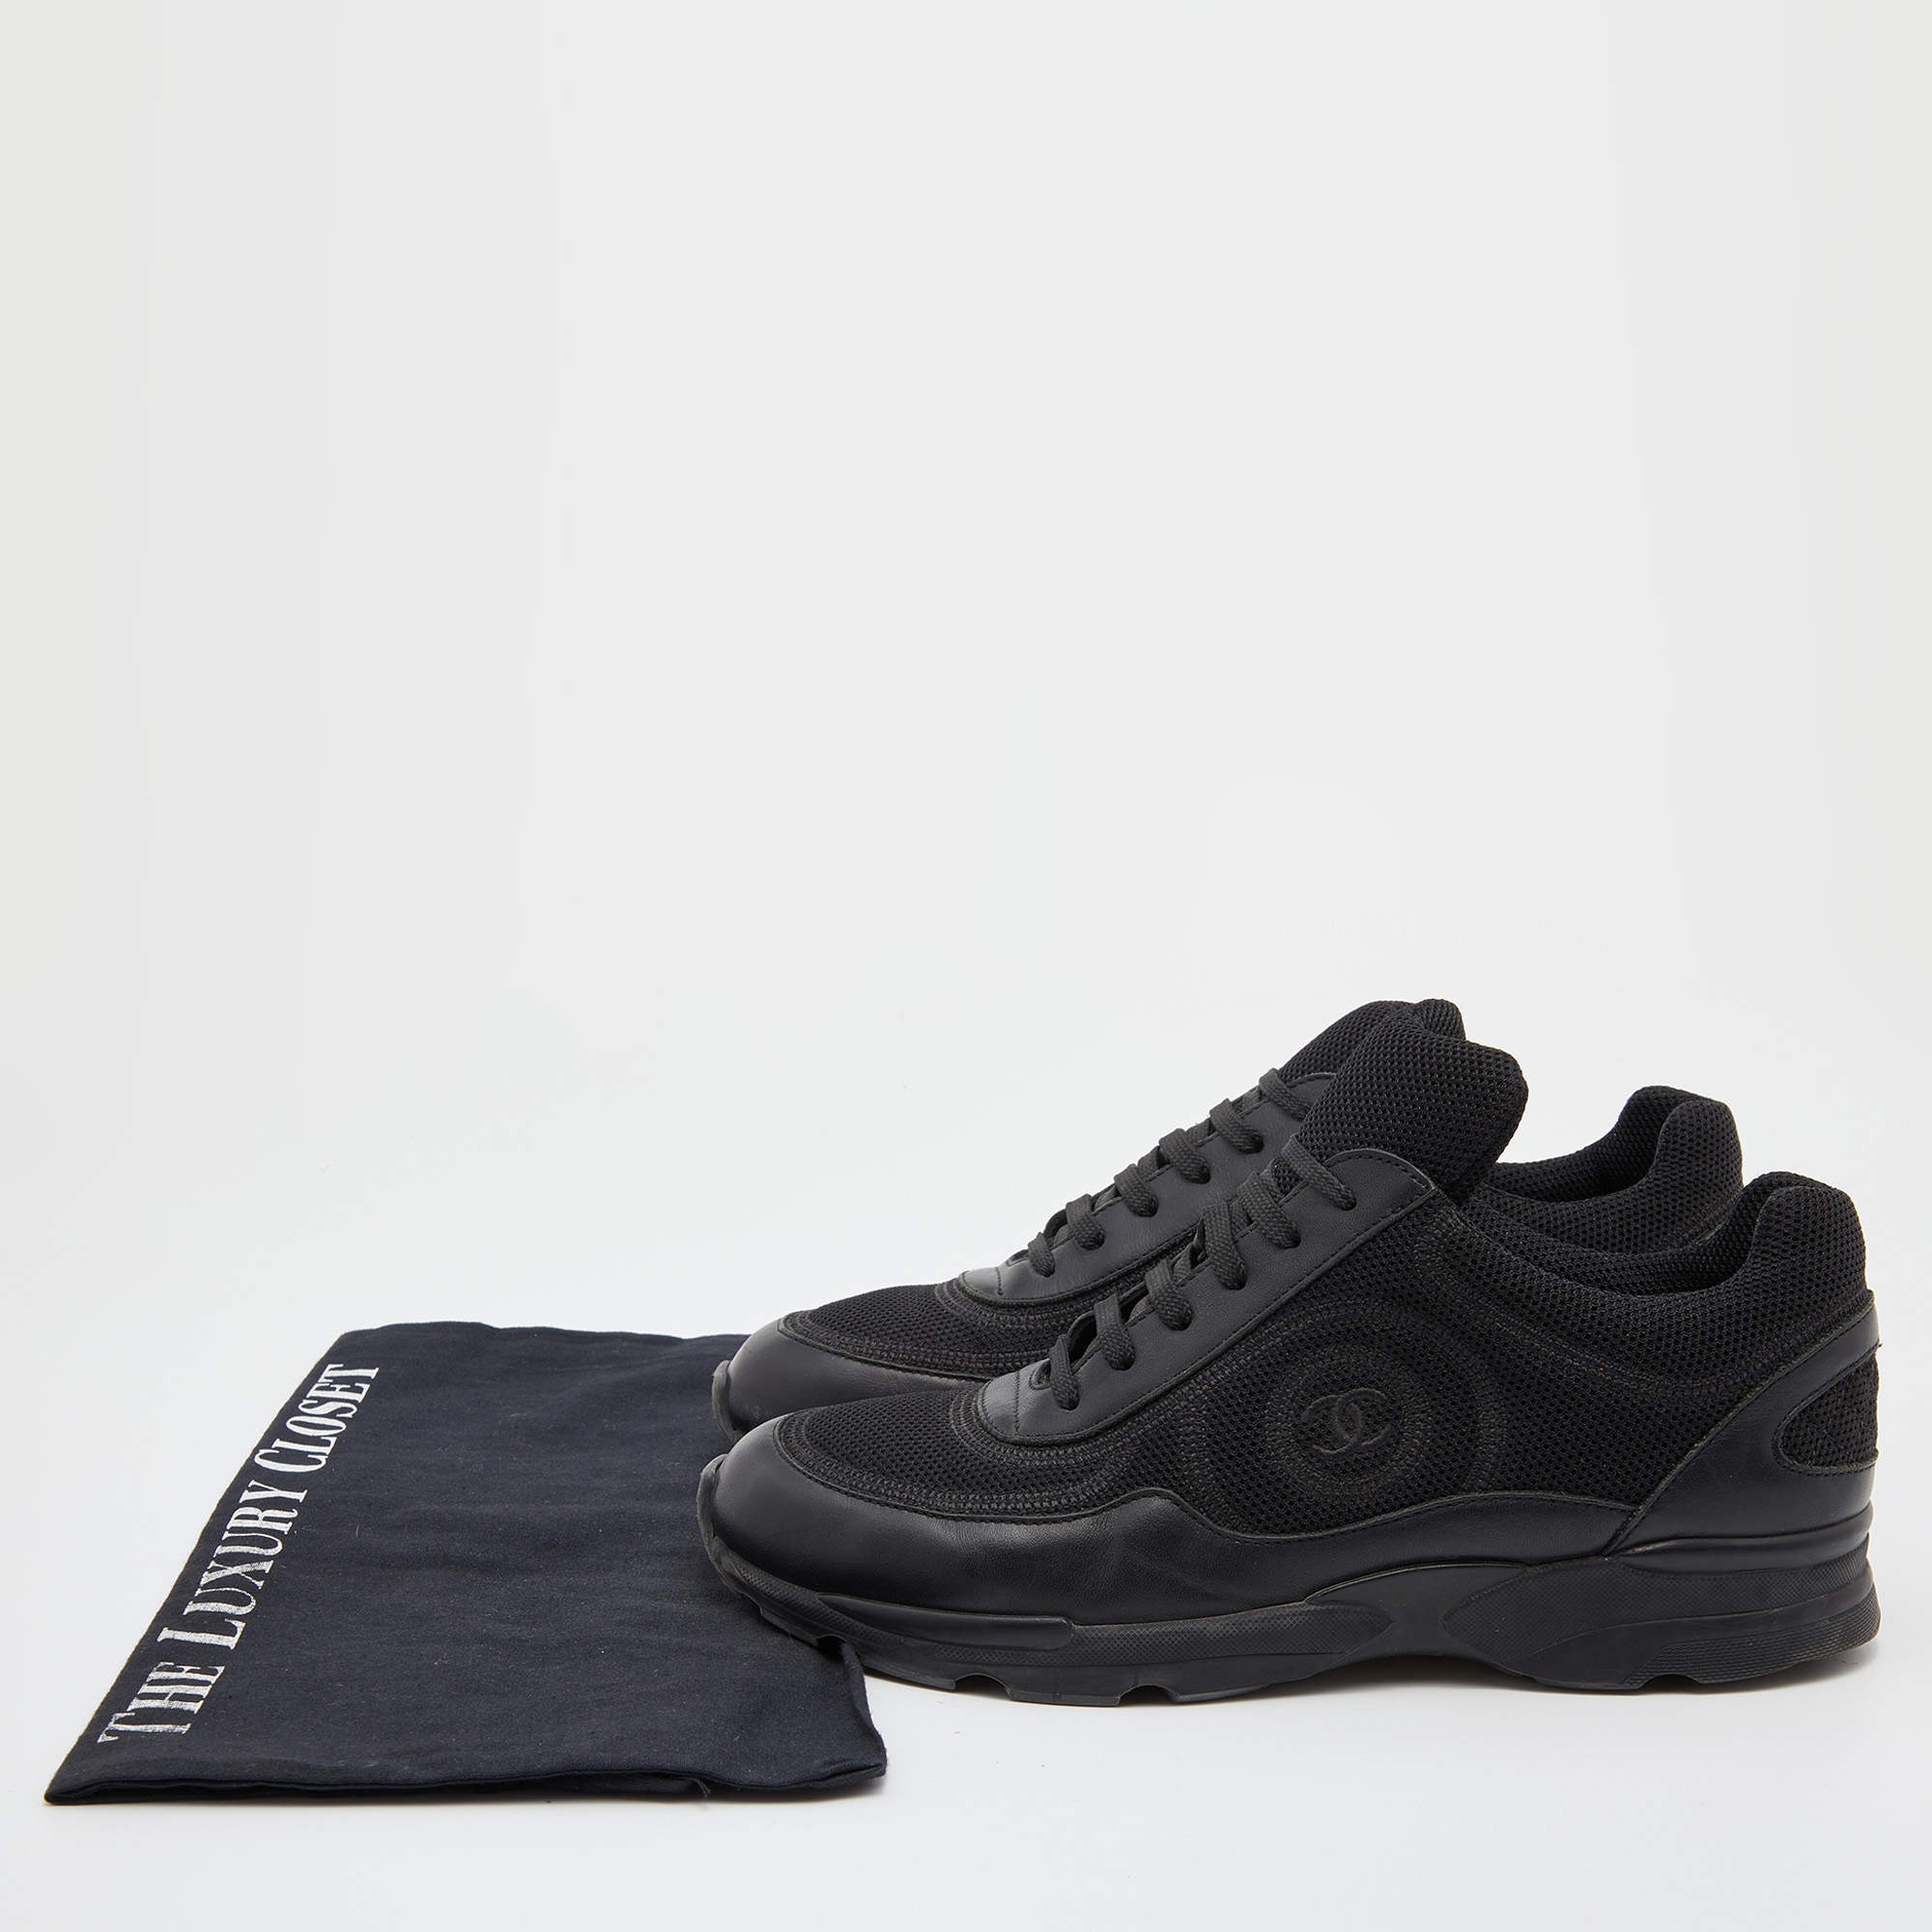 Chanel Black CC Lace Up Sneakers 40 – The Closet